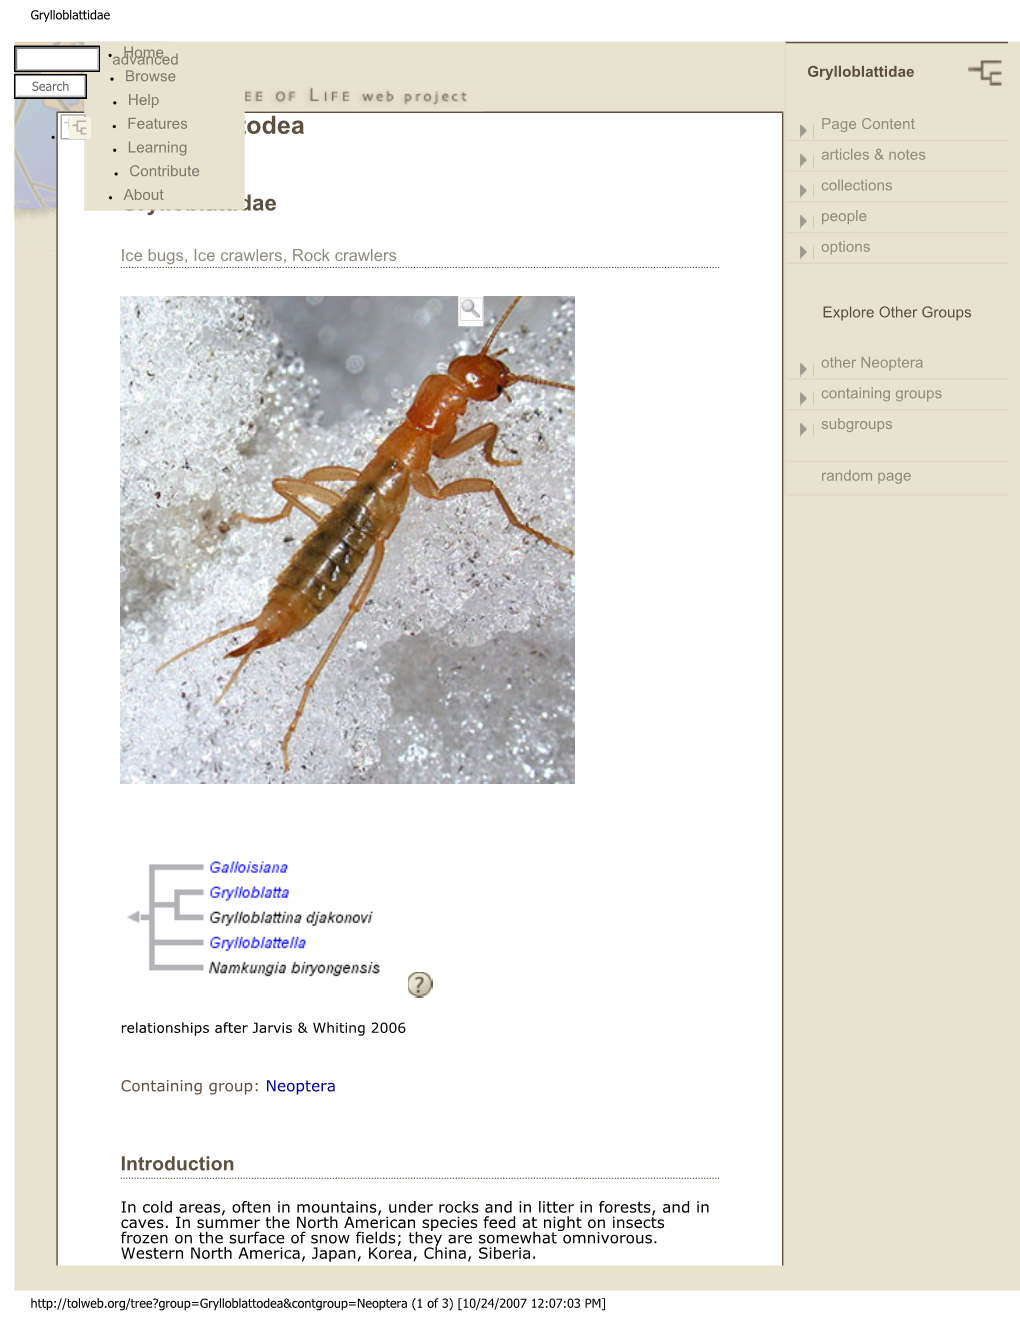 Grylloblattodea ● Page Learning Articles & Notes ● Contribute Collections ● About Grylloblattidae People Options Ice Bugs, Ice Crawlers, Rock Crawlers